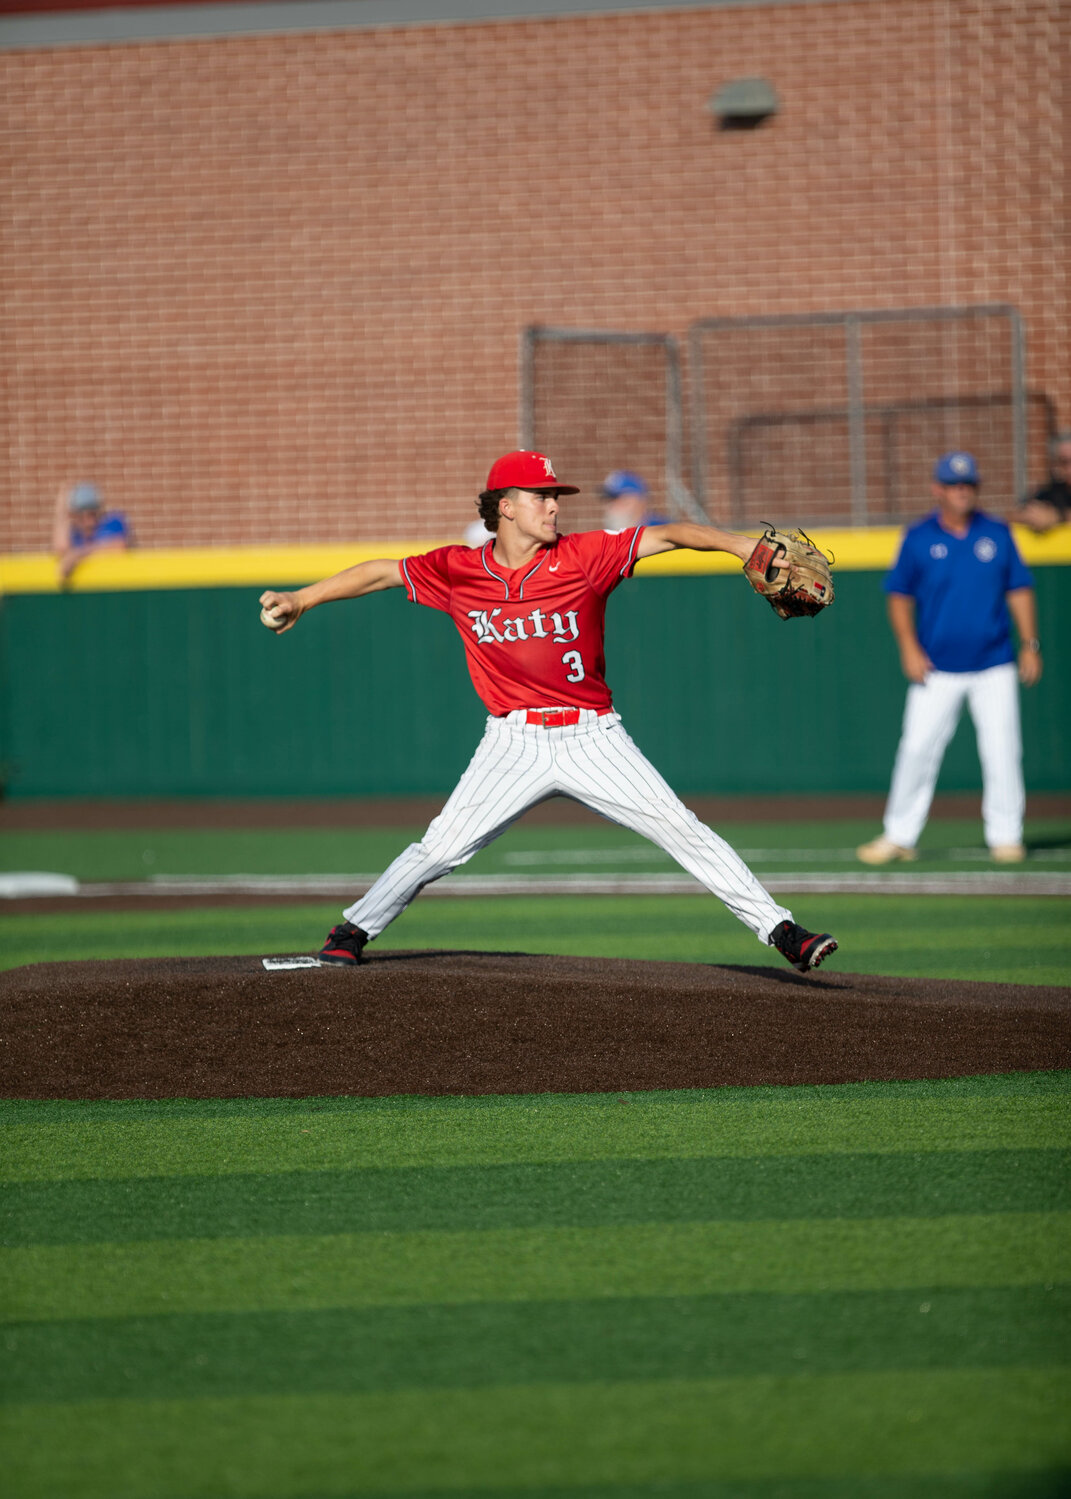 Caleb Koger pitches during Wednesday's Regional Semifinal between Katy and Clear Springs at Deer Park.